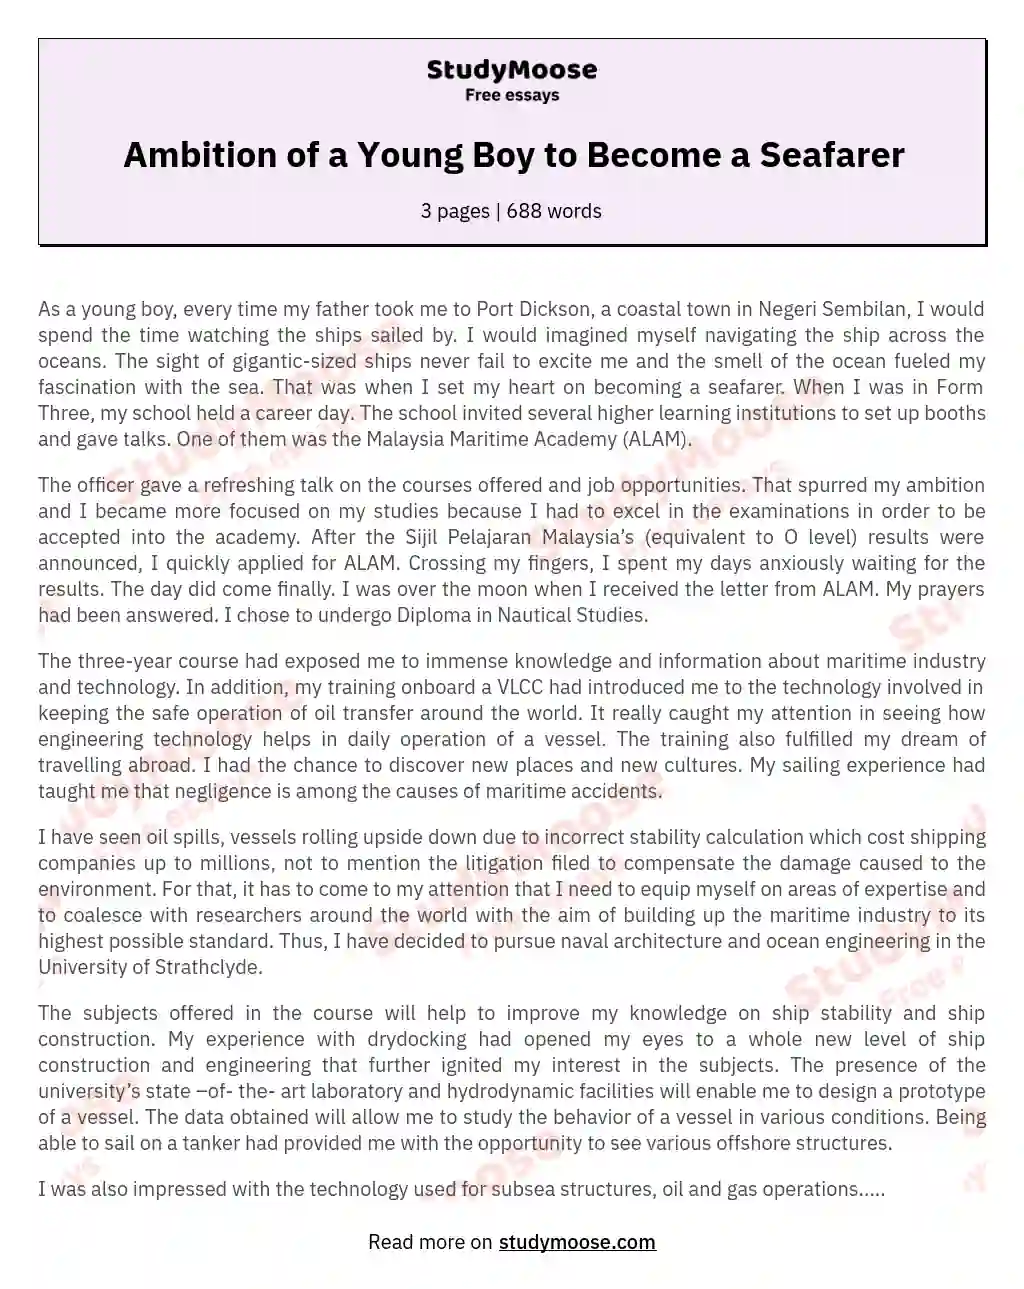 Ambition of a Young Boy to Become a Seafarer essay